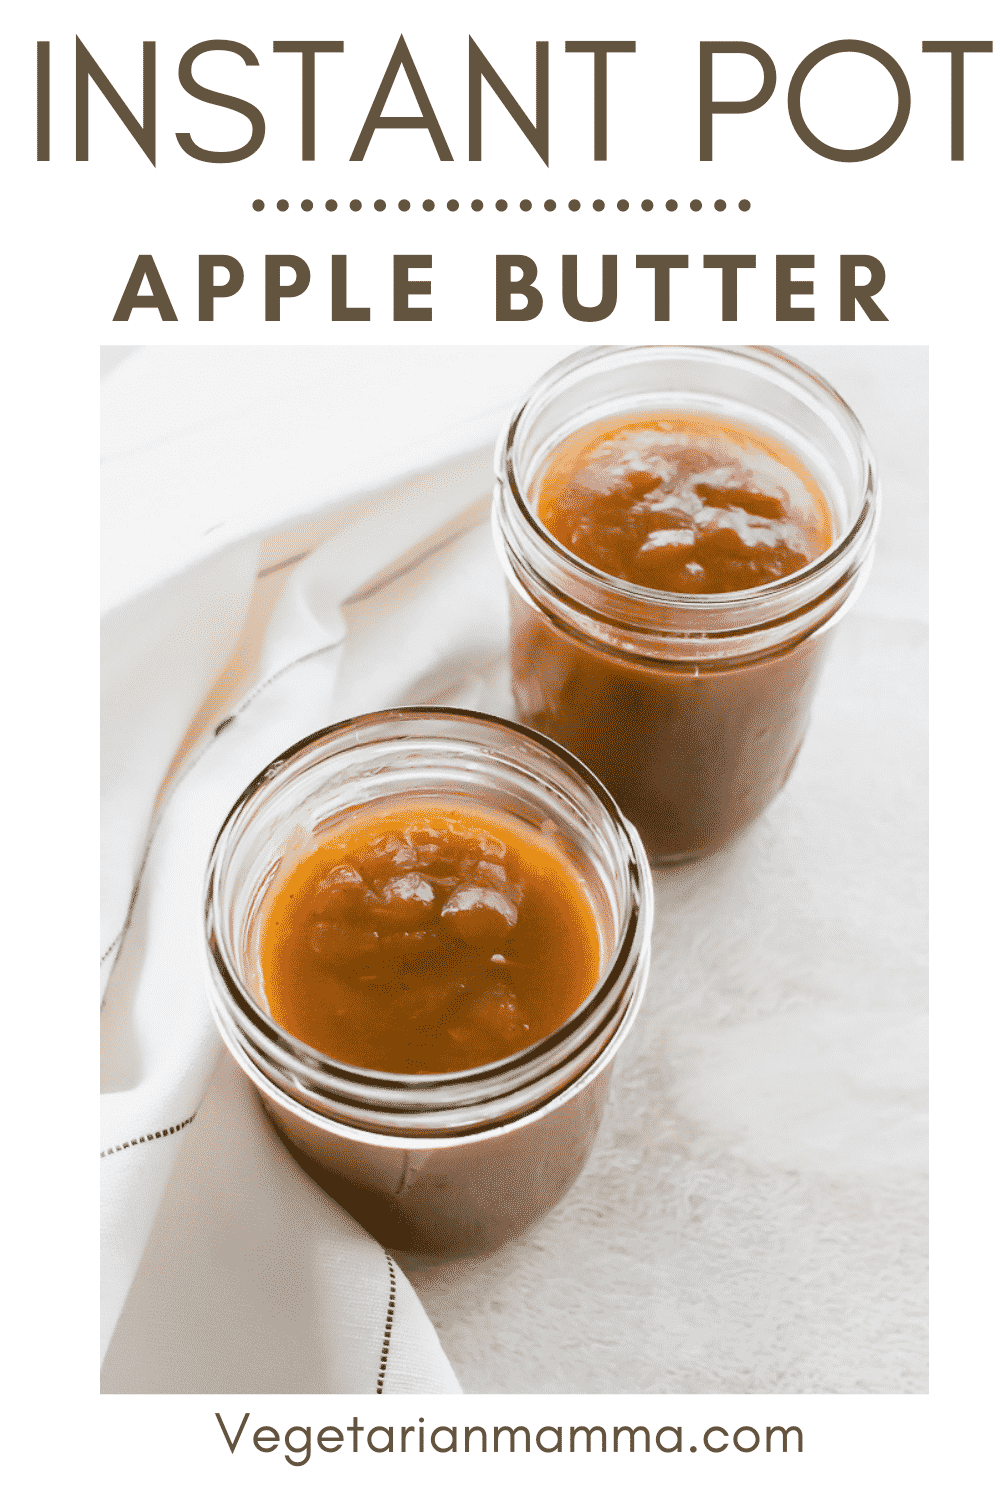 Instant Pot Apple Butter is the best vegan fruit spread made with whole apples and a bunch of fall flavors. No need to simmer apples, cinnamon, nutmeg, and cloves all day thanks to this handy pressure cooker! #applebutter #pressurecookerapplecutter #instantpotapplecutter